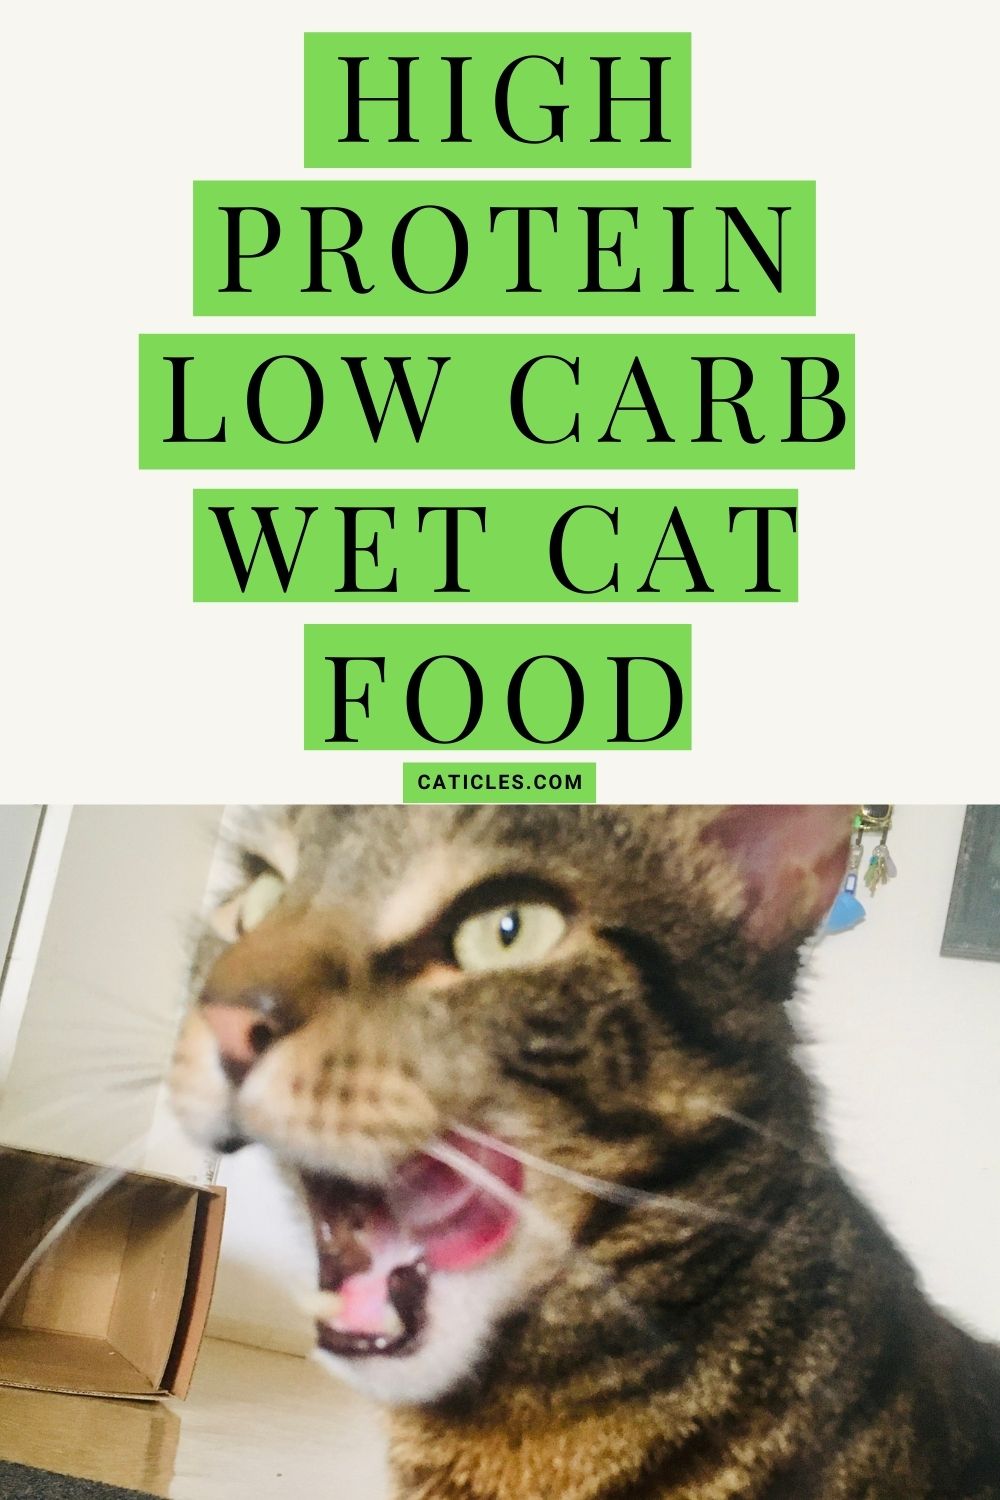 High Protein Low Carb Wet Cat Food Nutritional Analysis, 2021